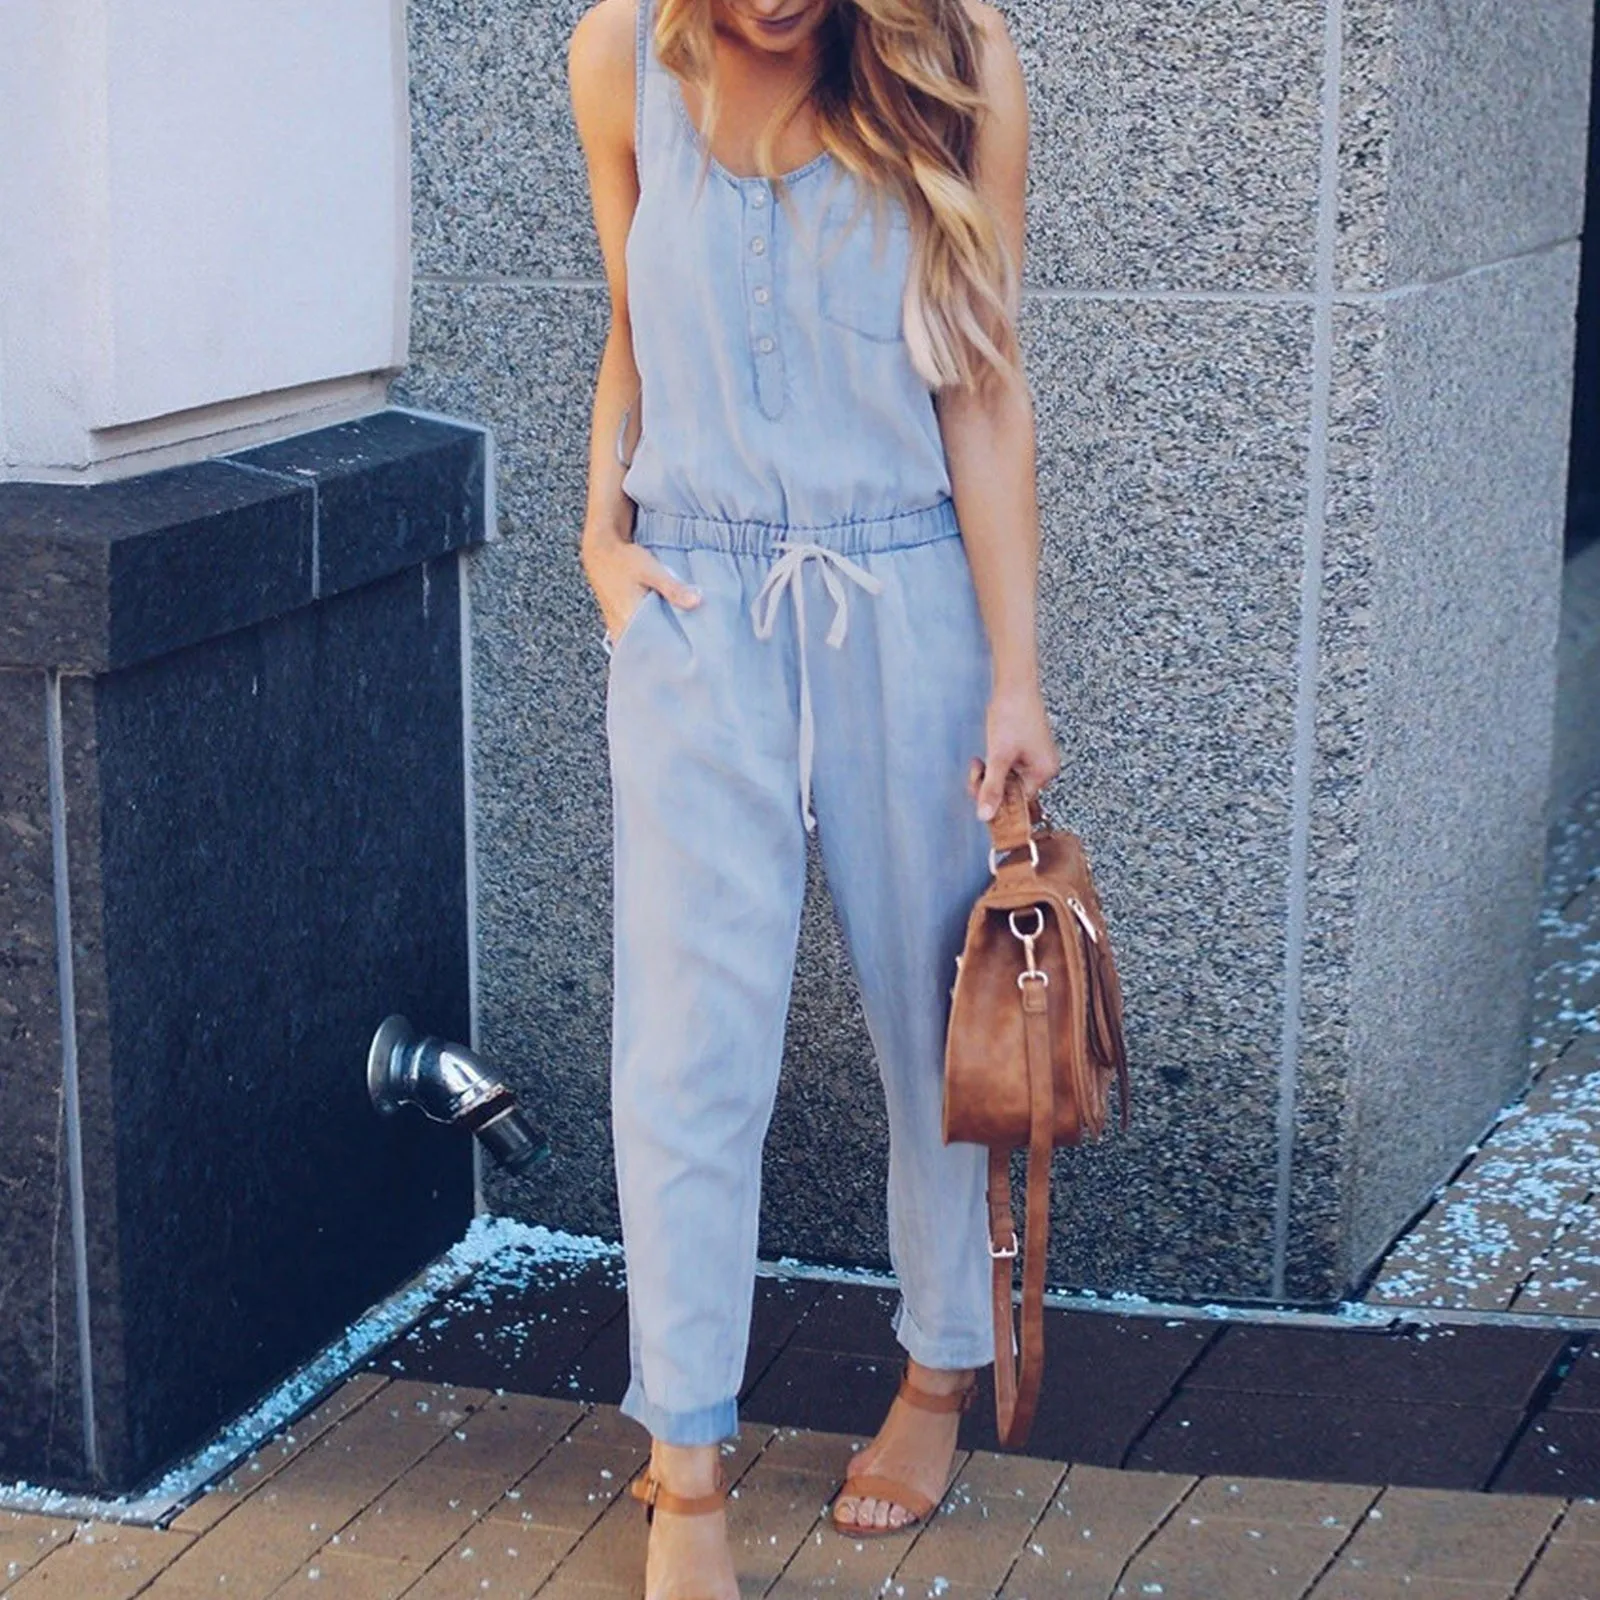 Women-Casual-Sleeveless-Tank-Jumpsuit-Demin-Jeans-Beach-Strappy-Button-Rompers-With-Pockets-Jumpsuit-Bodysuit-Long